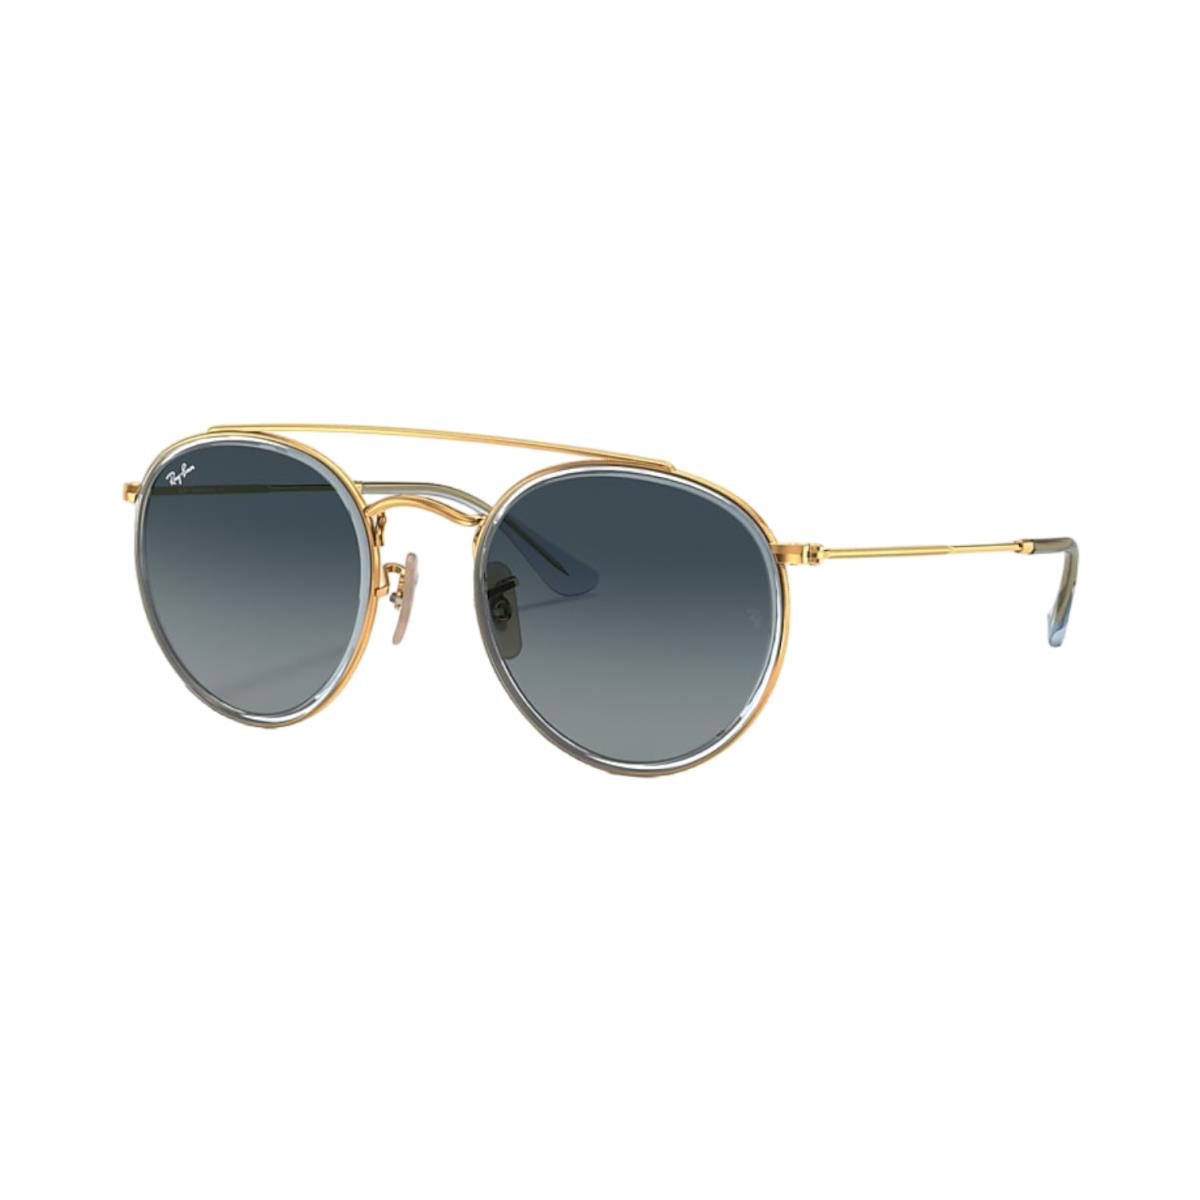 Ray-ban RB3647 Round Sunglasses - Gold Frame Blue Gradient Lenses